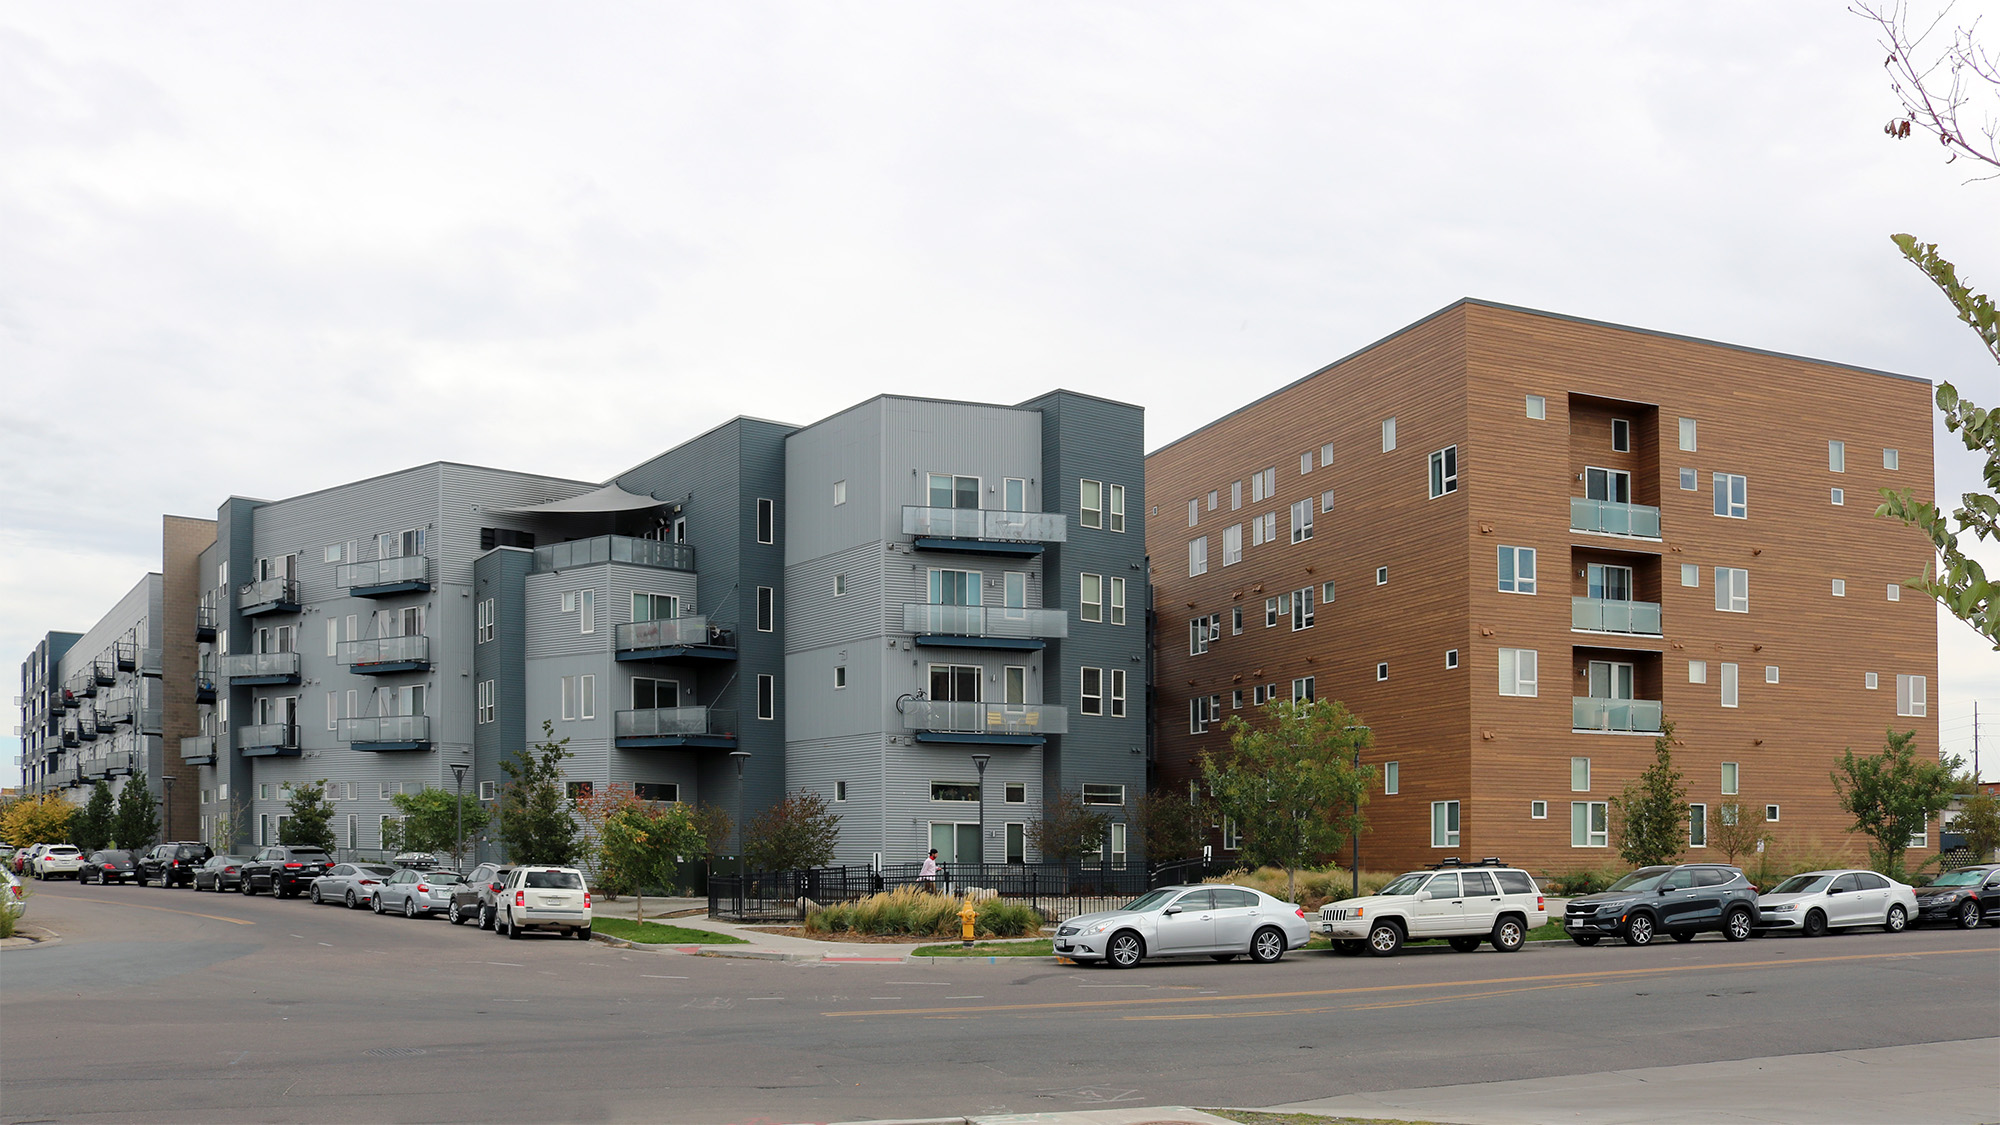 Exterior view of Dylan apartments with dog park in foreground